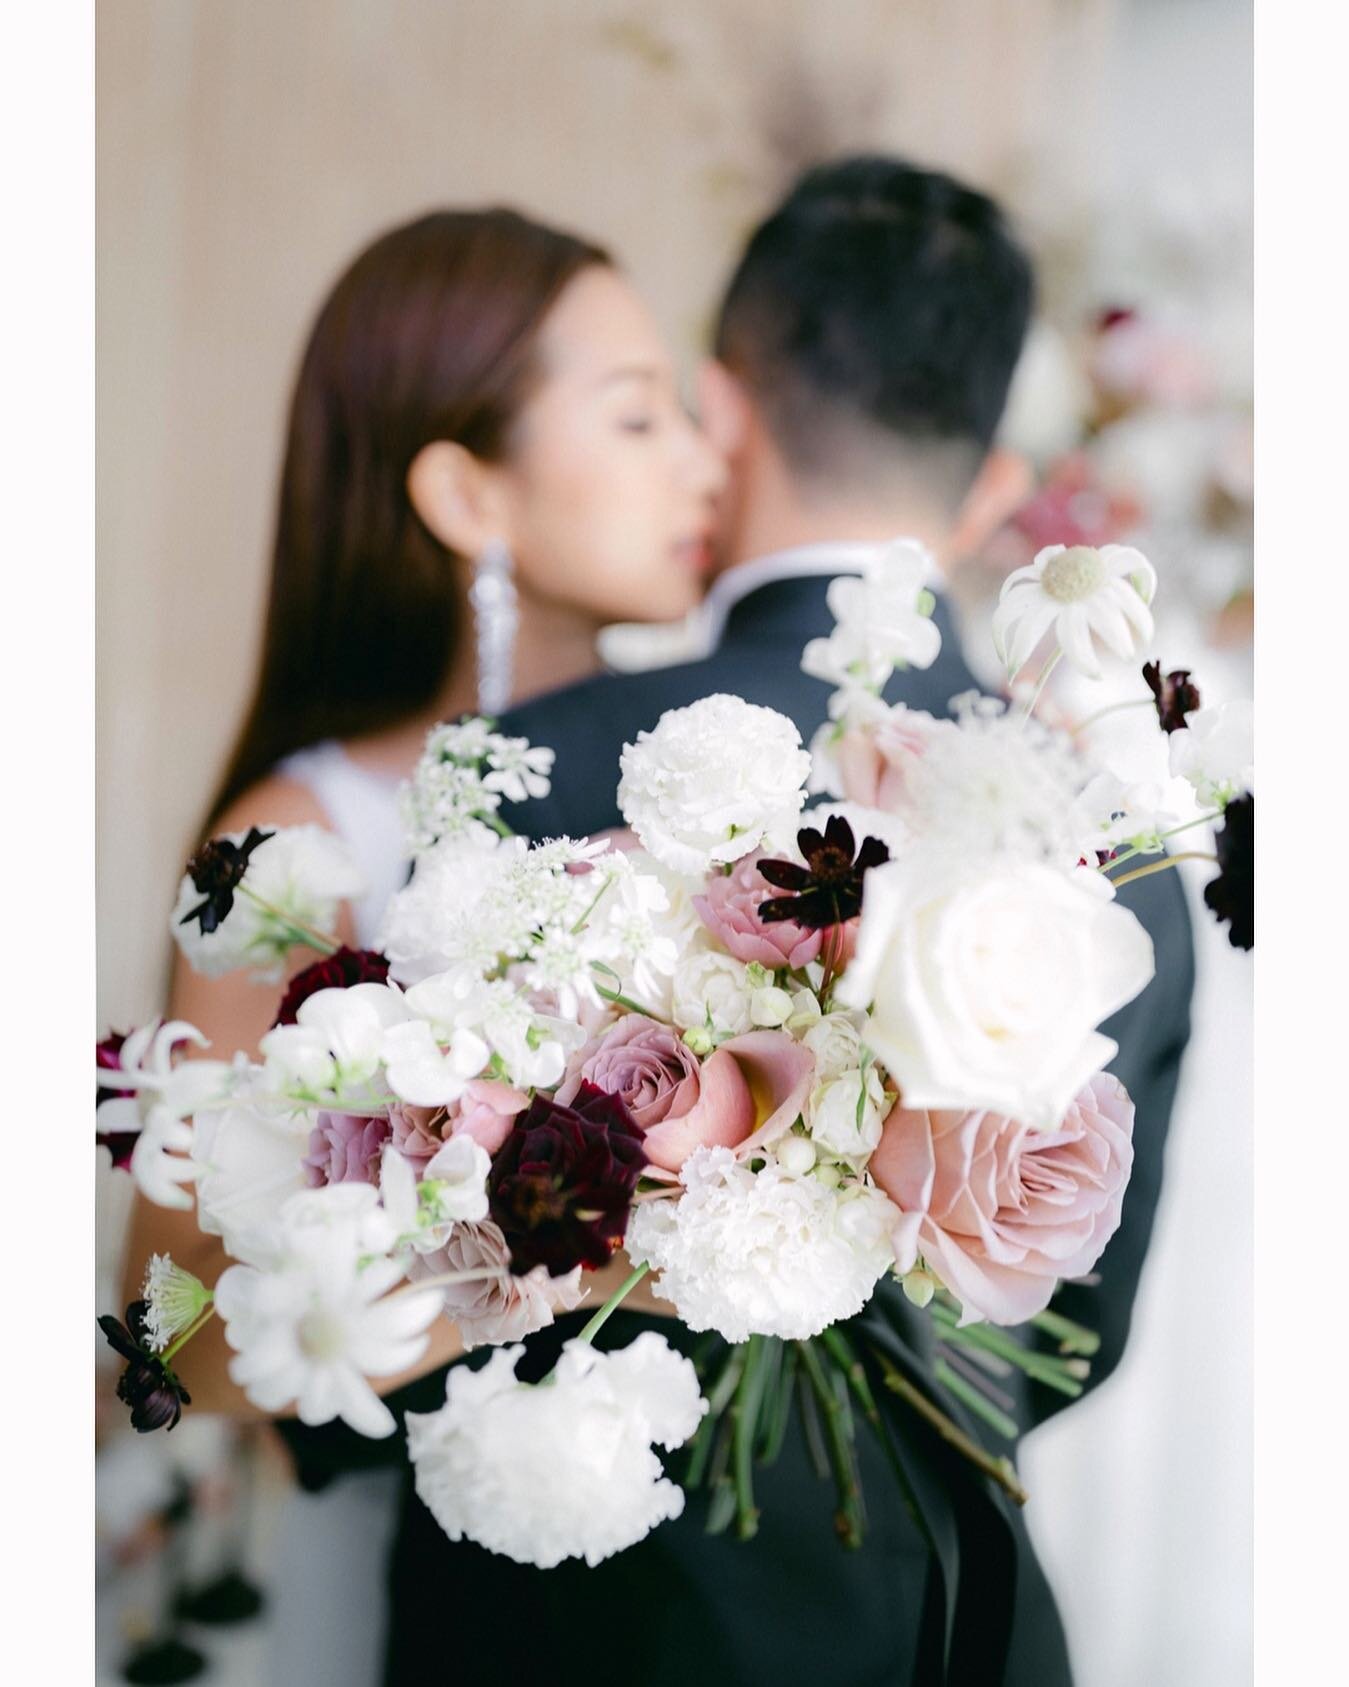 This love is blooming. 

Photography @blissnblooms 
Gowns @circleweddings 
Suit @fascino.bespoke
Hair and Makeup @echo_makeup 
Florist @dusty_styling_atelier 
Calligraphy @whalewhispers_  @i_am_illuu 
Earrings @downtheaisleatelier 
Couple @minnachu33